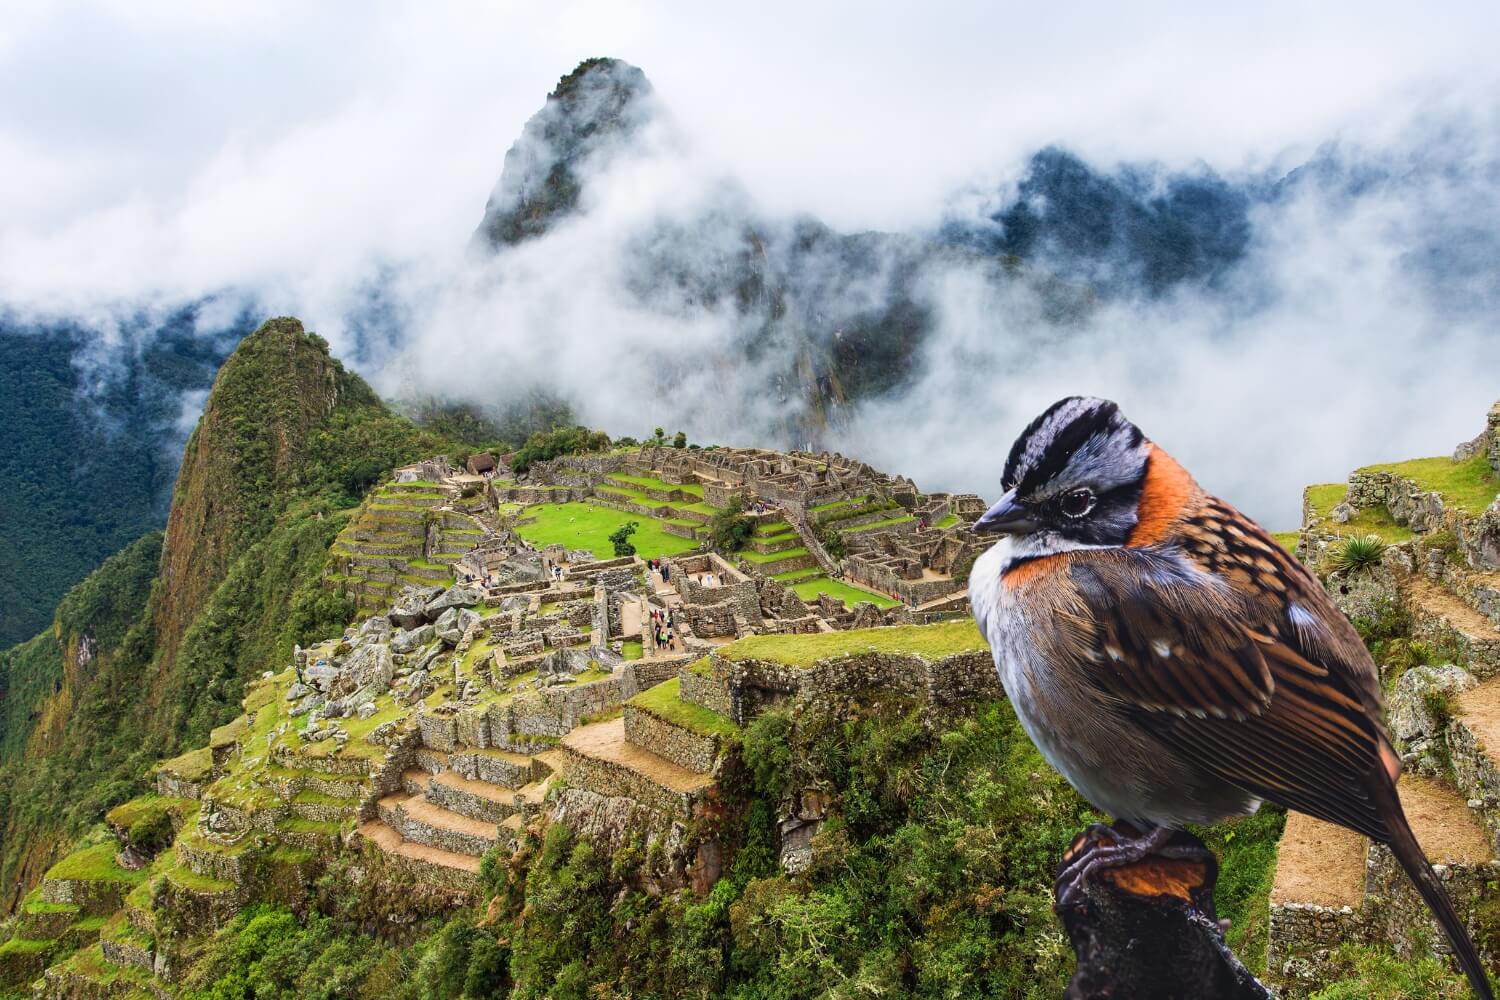 WHAT WAS THE REAL NAME OF MACHU PICCHU?